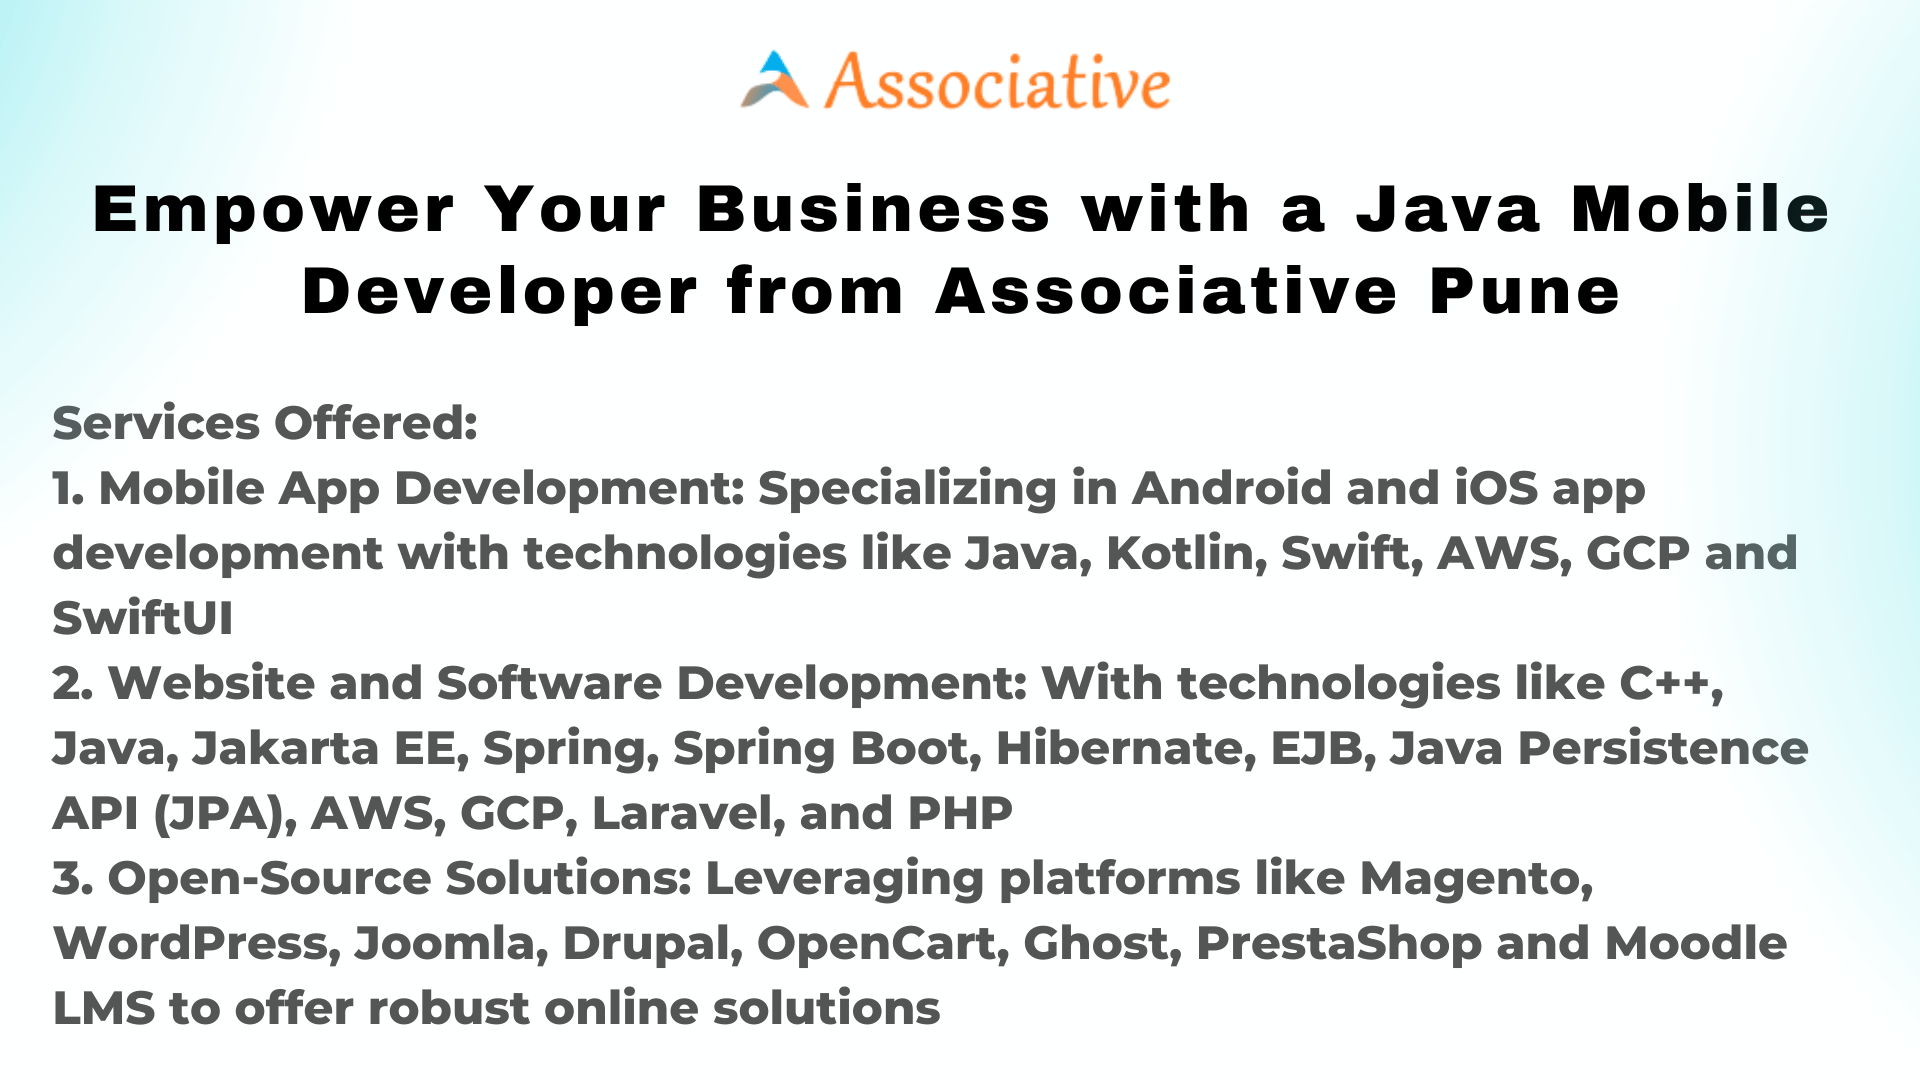 Empower Your Business with a Java Mobile Developer from Associative Pune